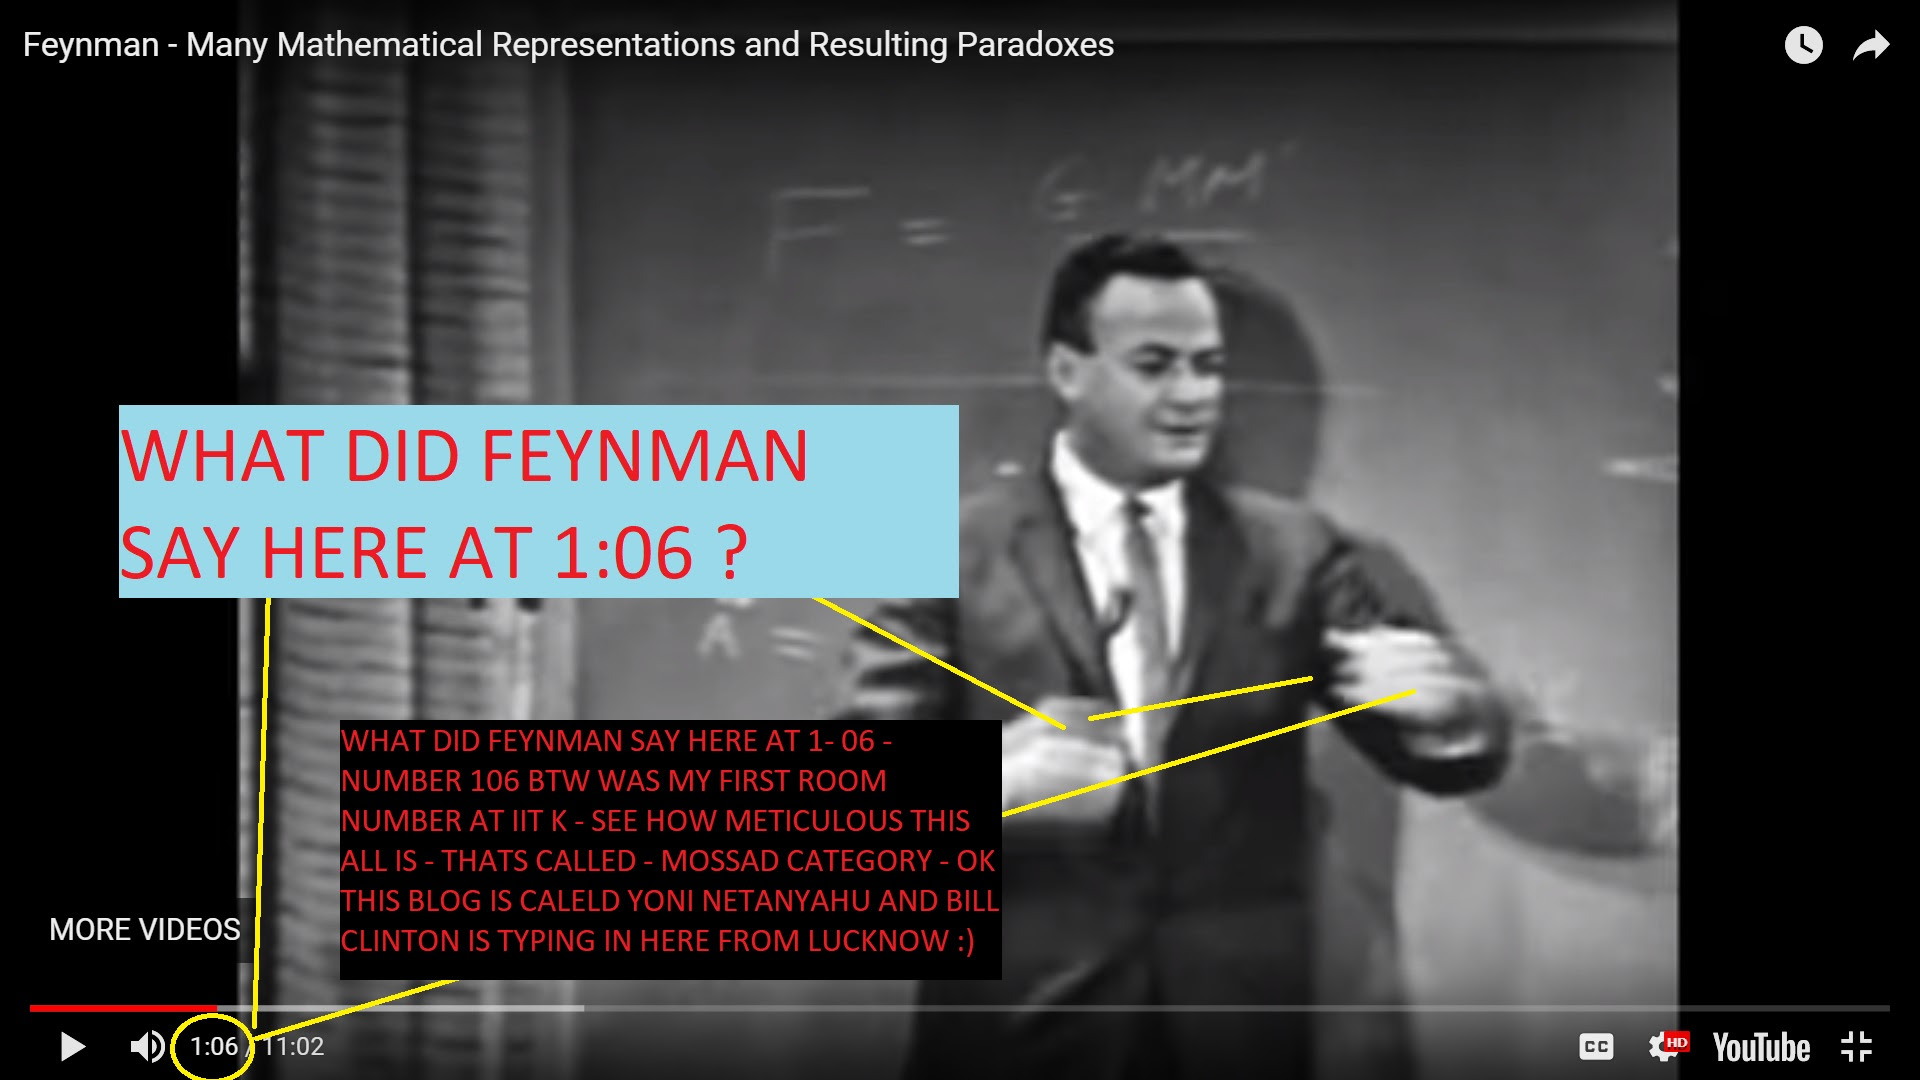 WHAT DID FEYNMAN SAY ON NUMBERS IN HERE AT 106